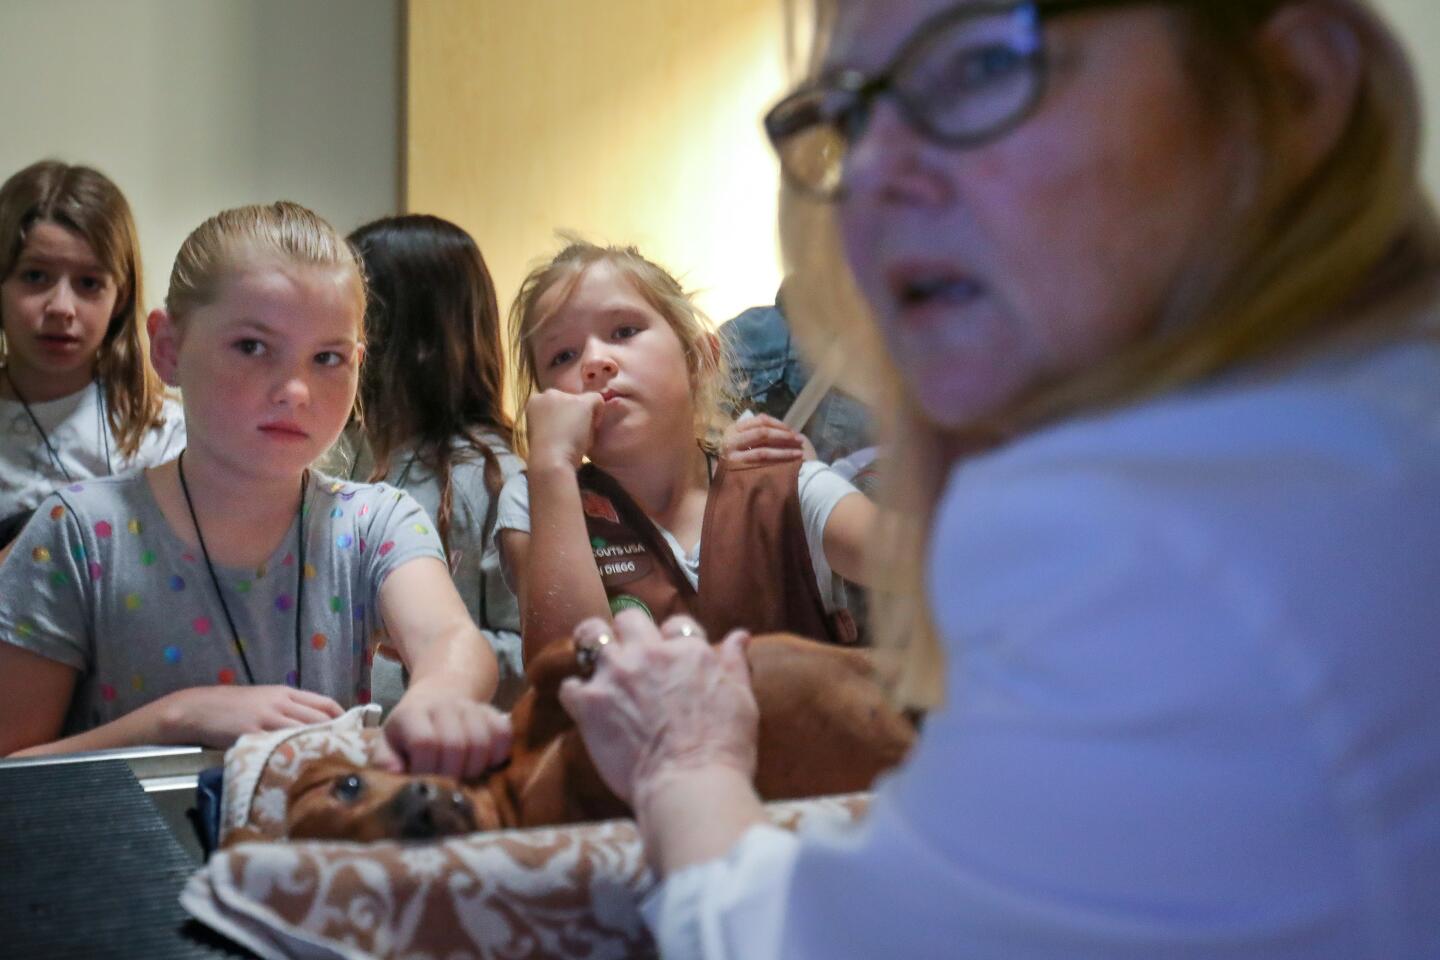 Kaylee Taylor, 9, left, helps as Charlie Heiss, 8, center, under the guidance of veterinarian, Dr. Patricia Carter, Chief of Staff at the Helen Woodward Animal Center, as they do a sonogram on Dr. Carter's dog, Gypsy, during the one-day veterinarian camp, February 8, in Rancho Santa Fe.